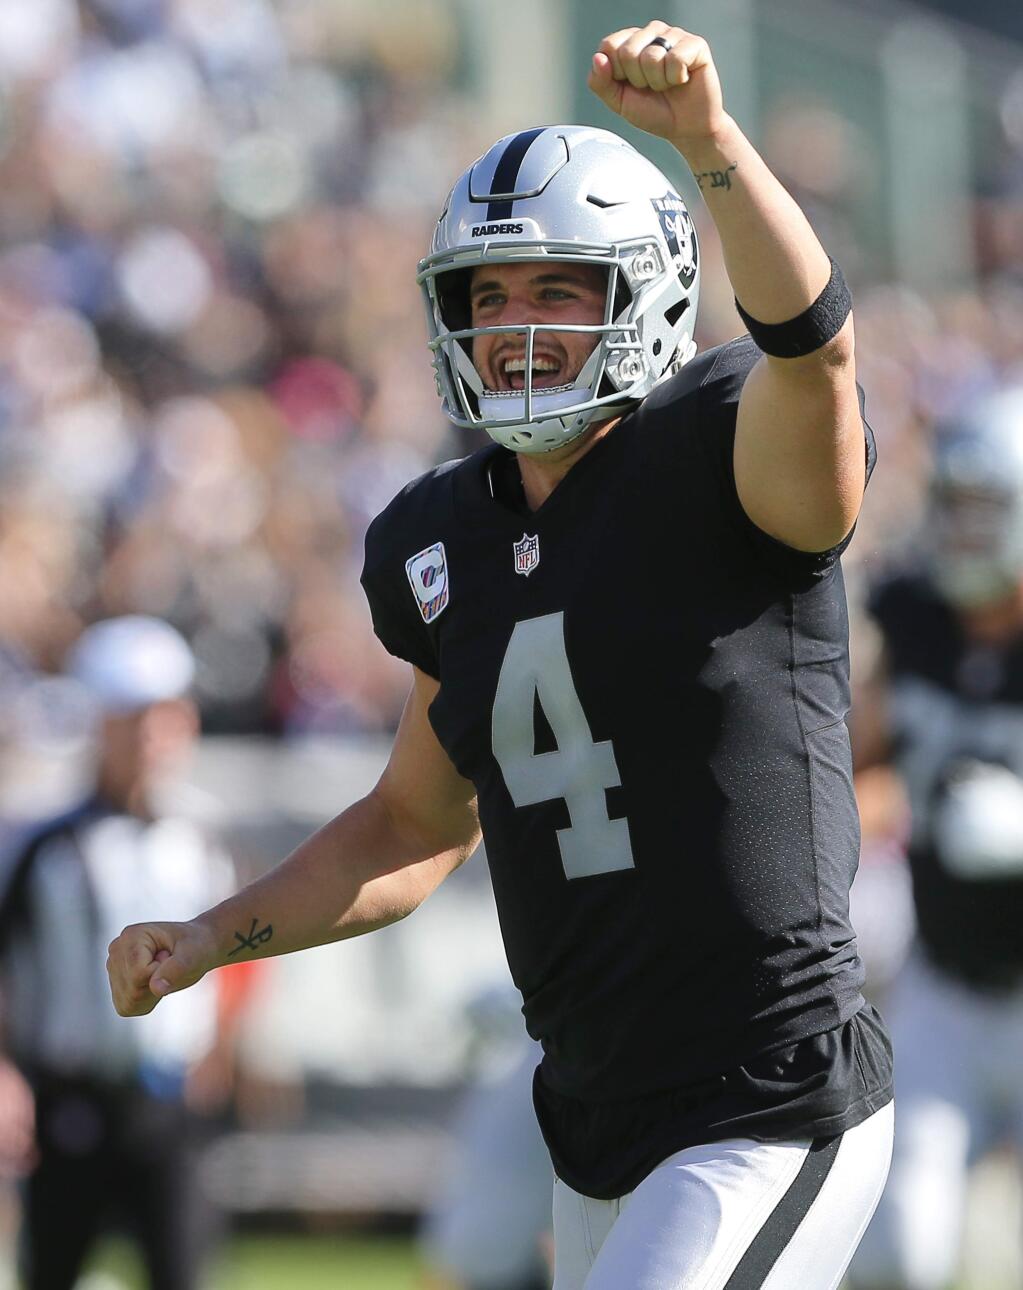 Oakland Raiders quarterback Derek Carr celebrates a touchdown against the Indianapolis Colts, during their game in Oakland on Sunday, October 28, 2018. The Colts defeated the Raiders 42-28. (Christopher Chung/ The Press Democrat)